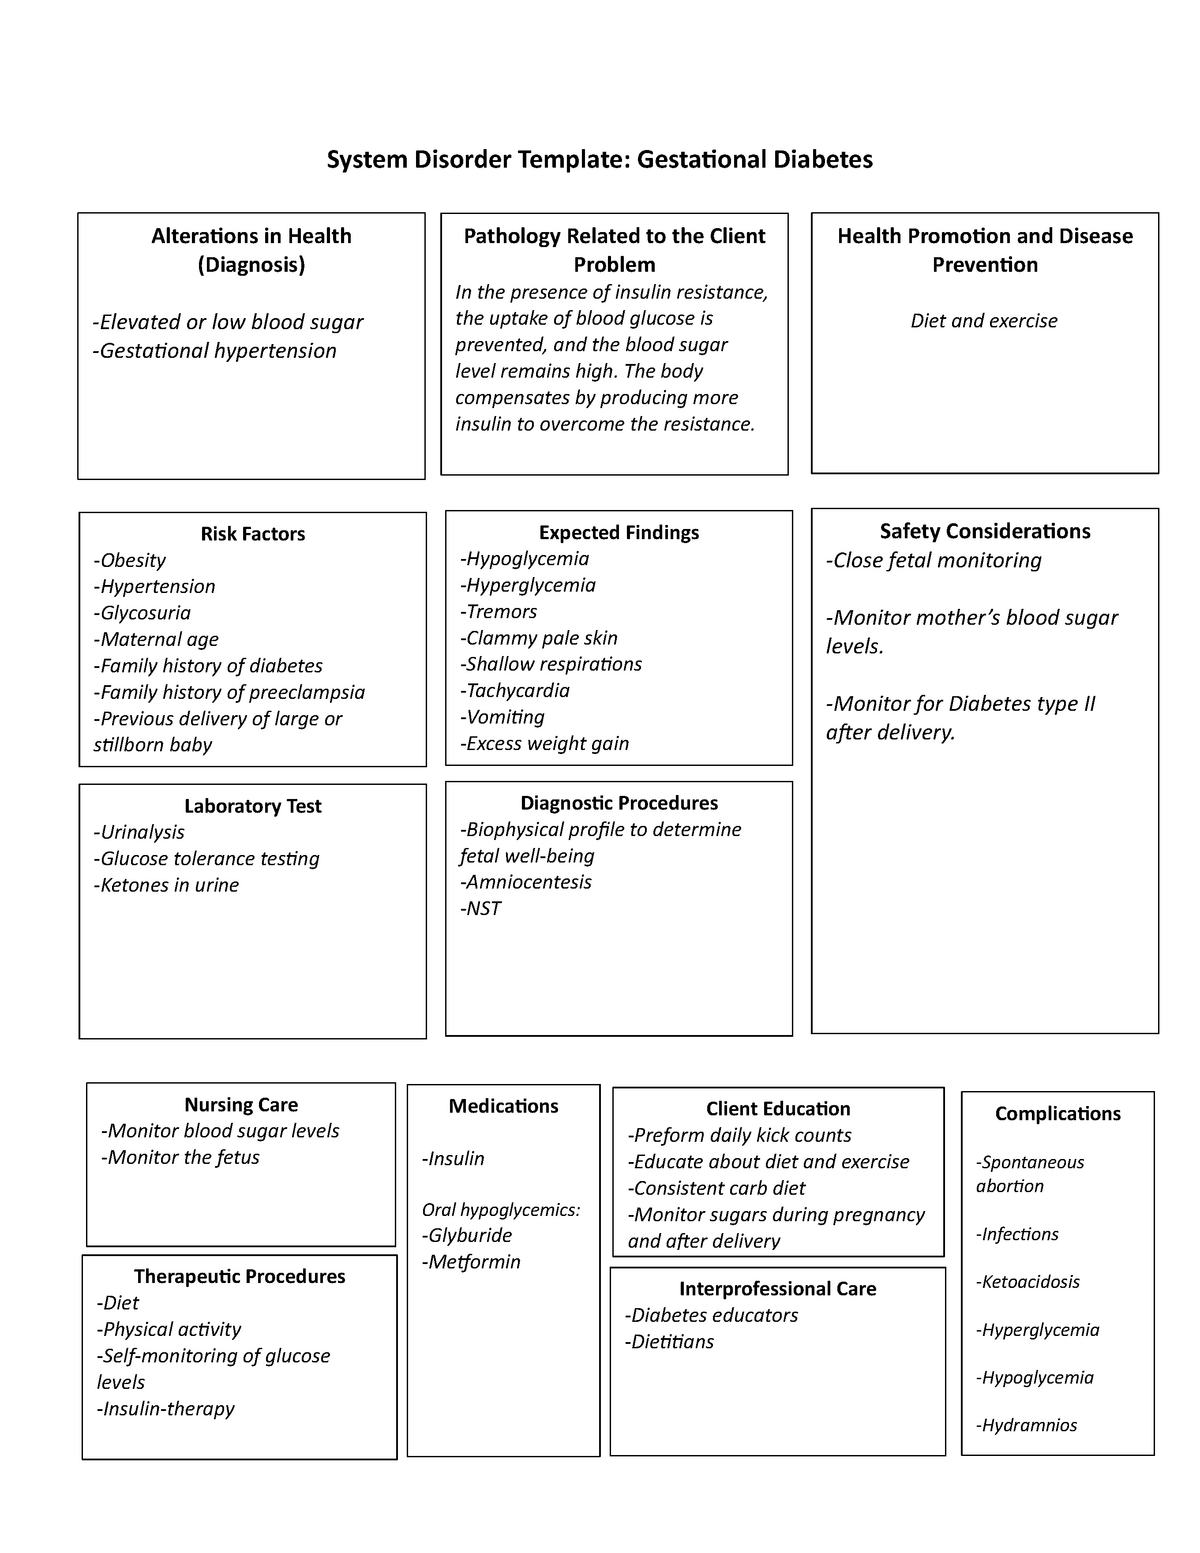 Diabetes System Disorder Template